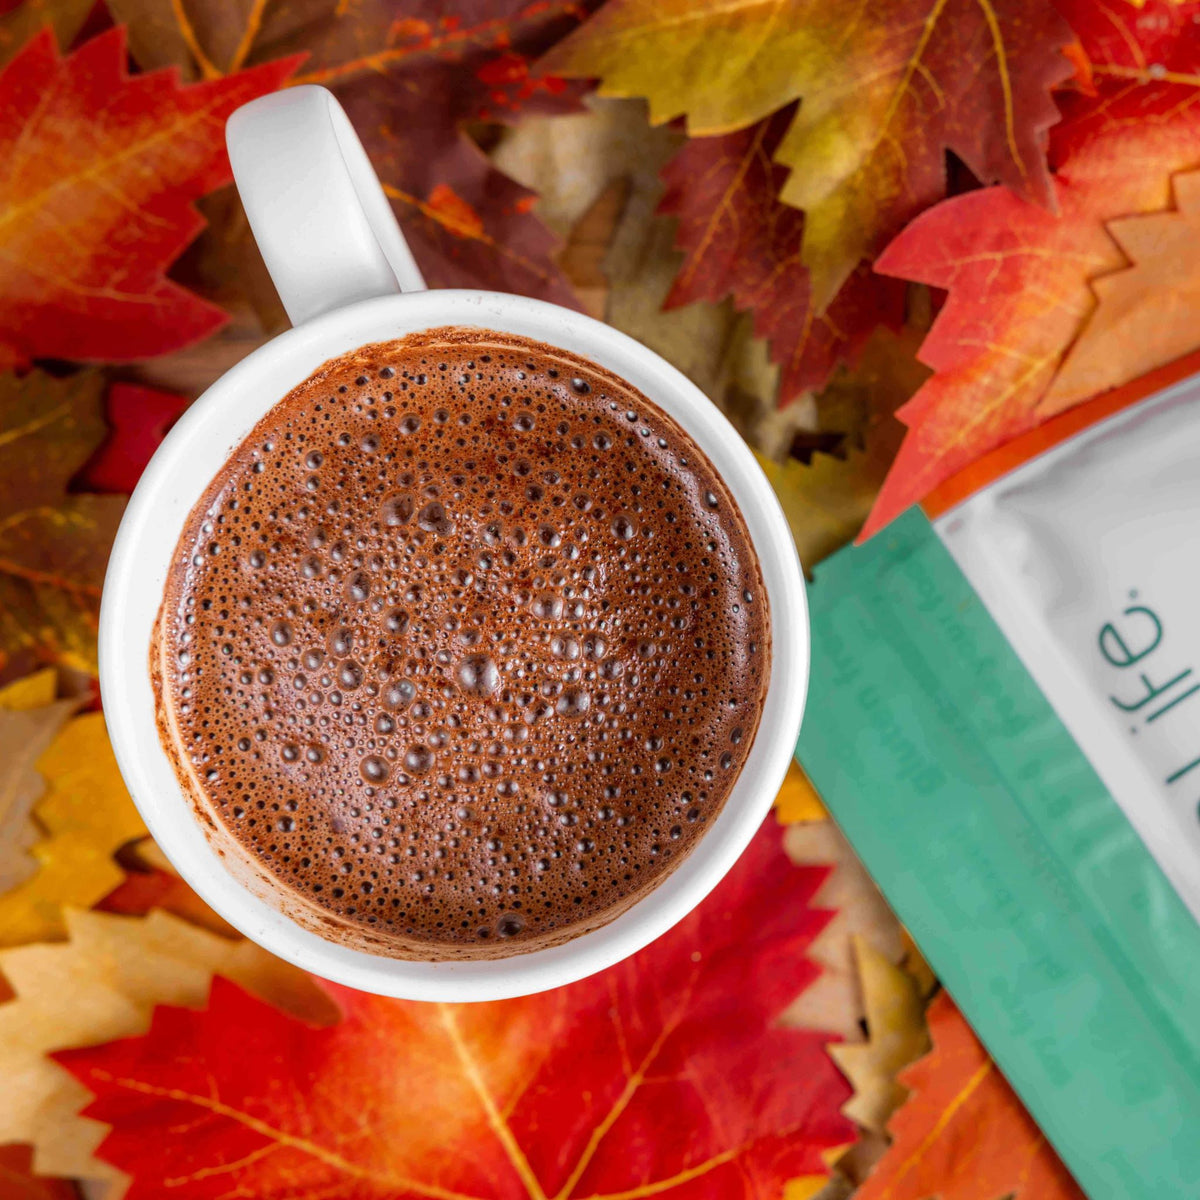 Bare Life Dairy-Free Pumpkin Spice Hot Cocoa Mix - Vegan, Soy Free, Kosher Pareve, Organic, and Delicious Fall Drink